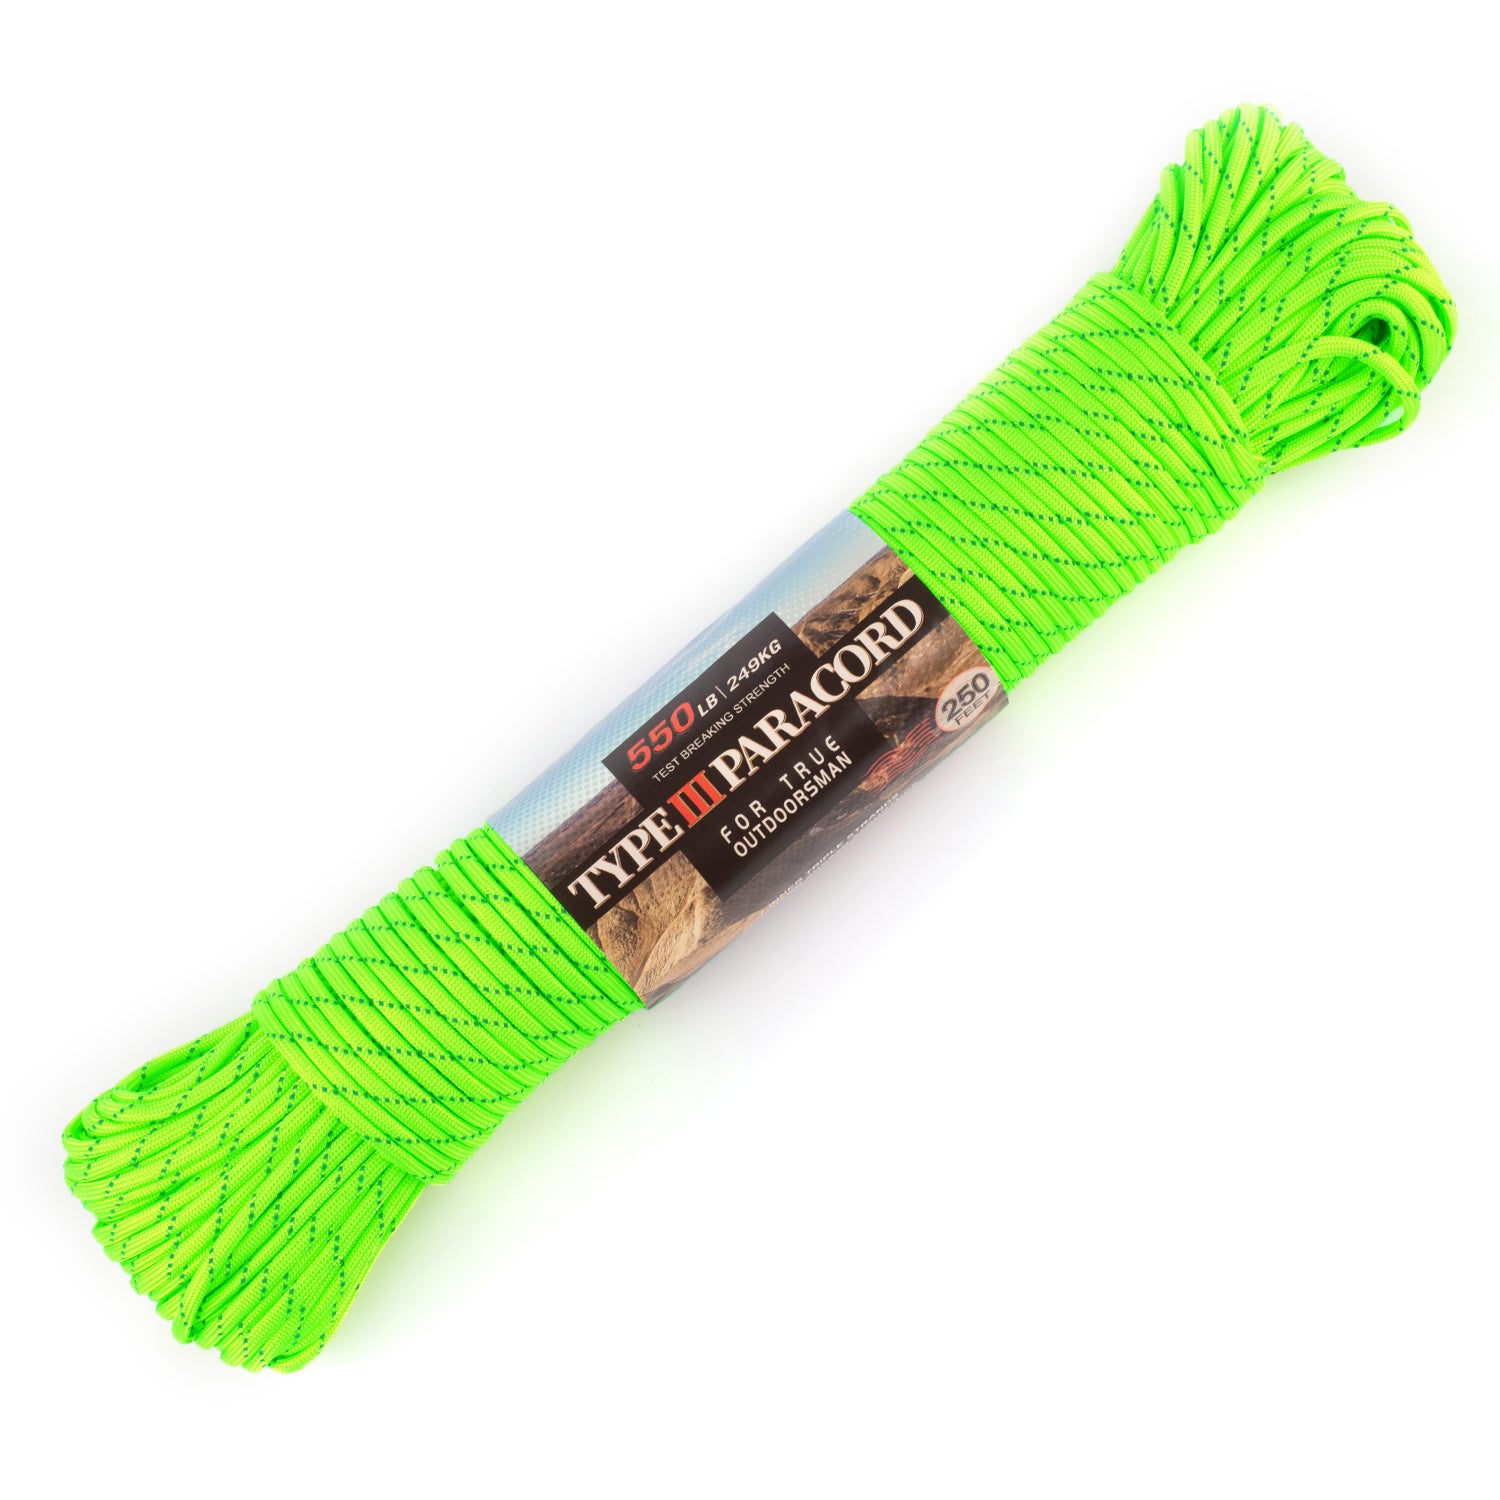 Buy Paracord 550 type III Ultra Neon Green Diamond from the expert